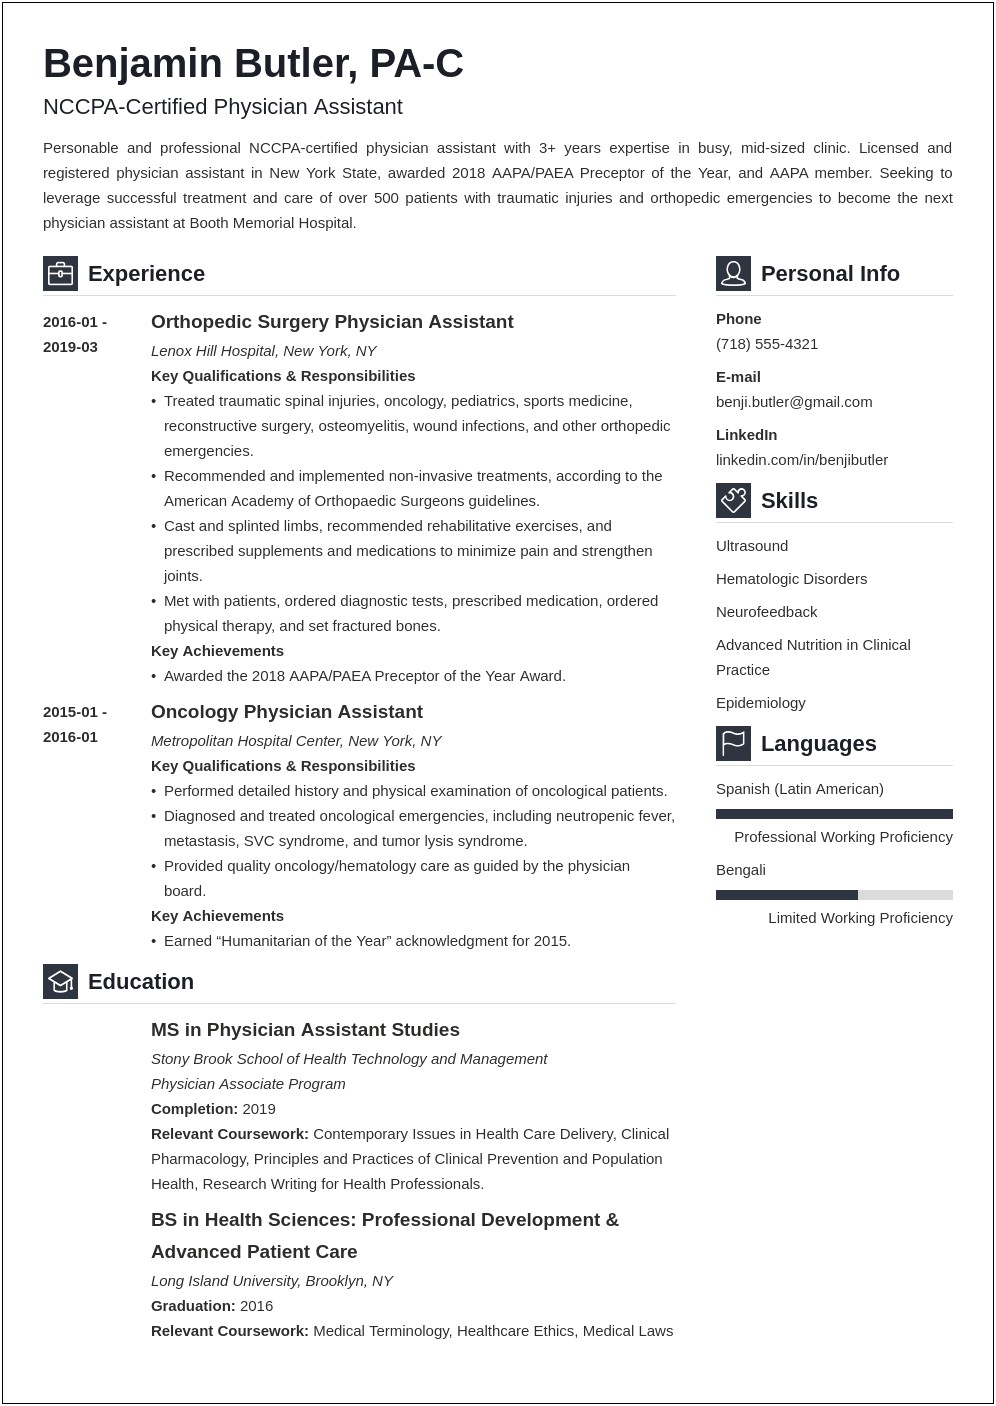 Resume Objective For Prospective Physician Assistant